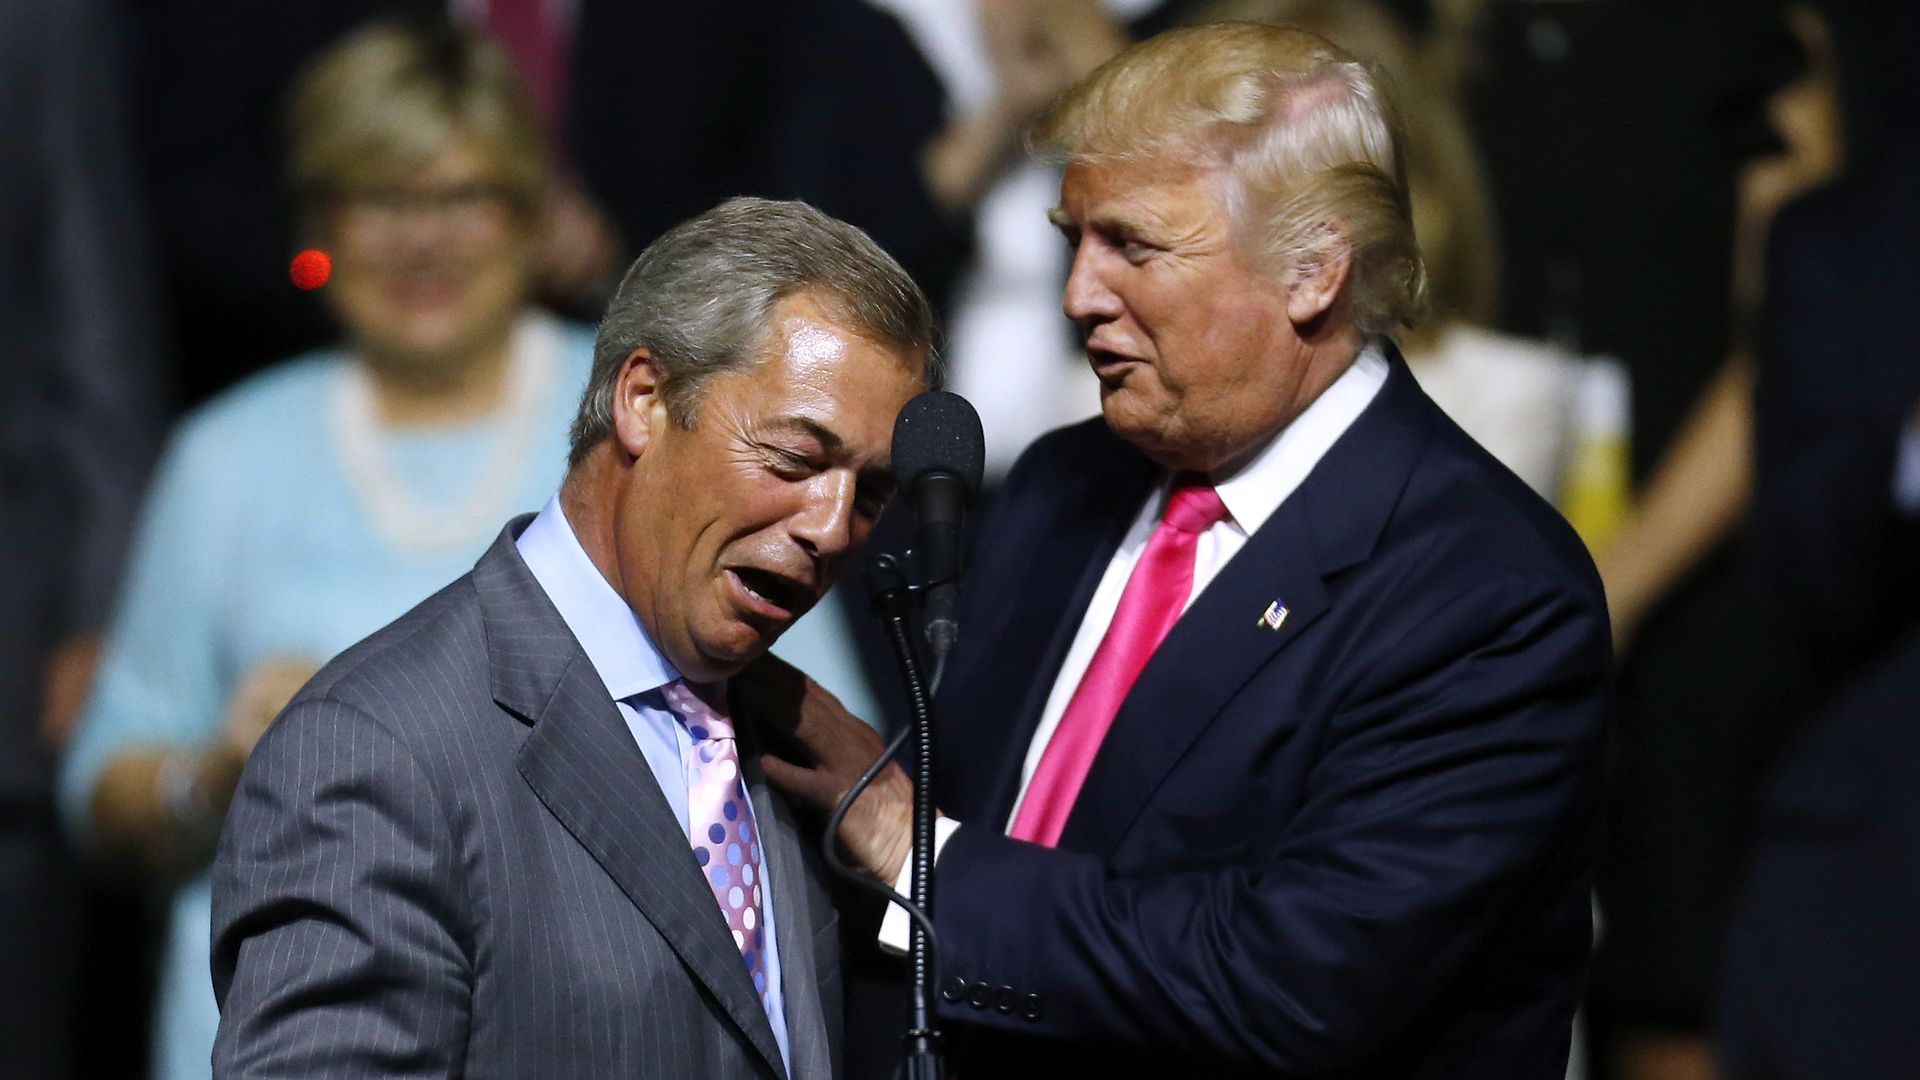 Then-Republican Presidential nominee Donald Trump, right, greets then-UKIP leader Nigel Farage during a campaign rally at the Mississippi Coliseum on August 24, 2016 in Jackson, Mississippi. 